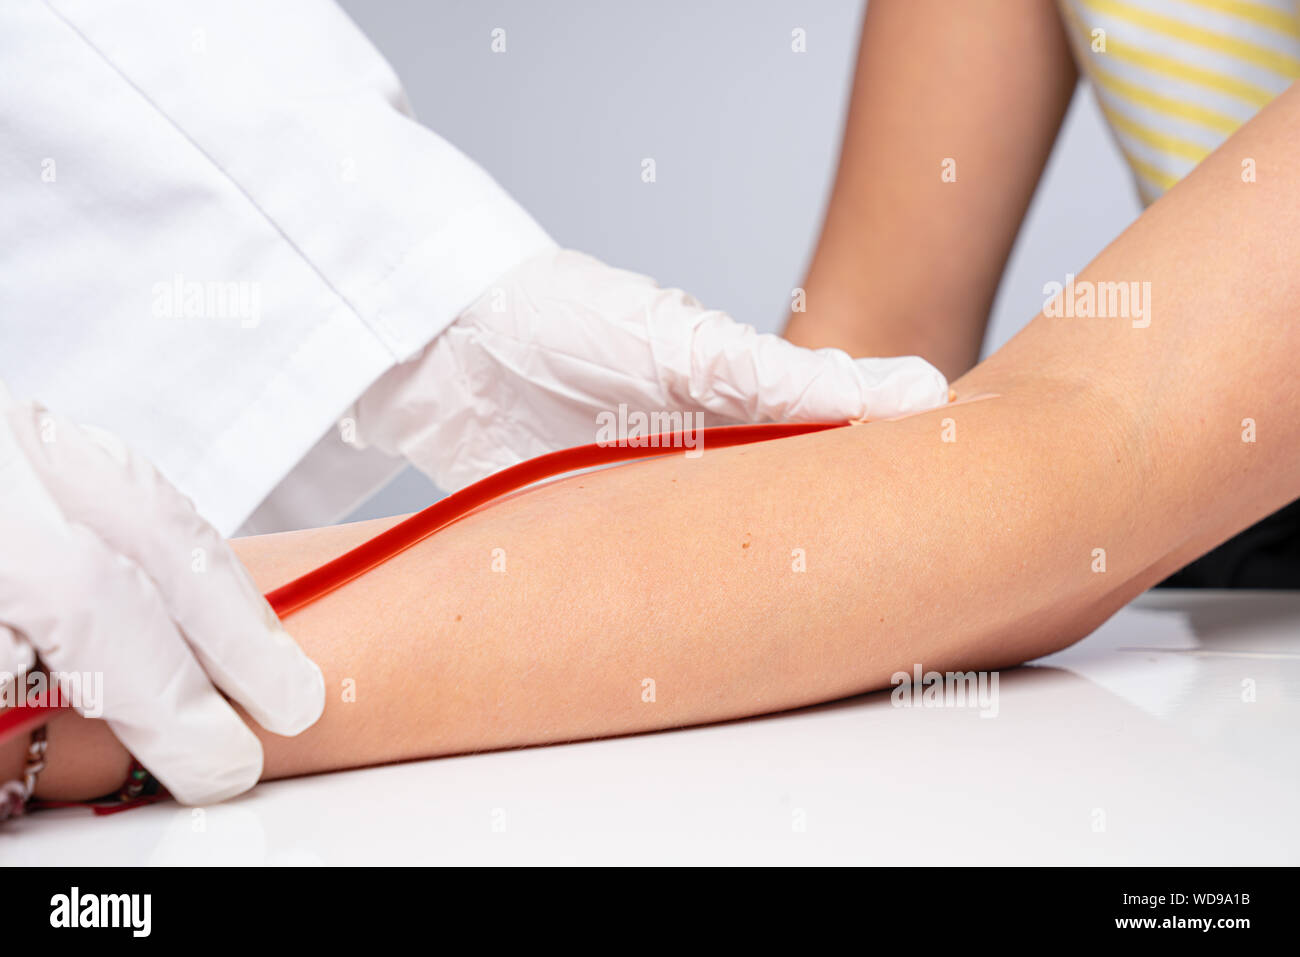 doctor puts a cannula on the arm of a patient Stock Photo